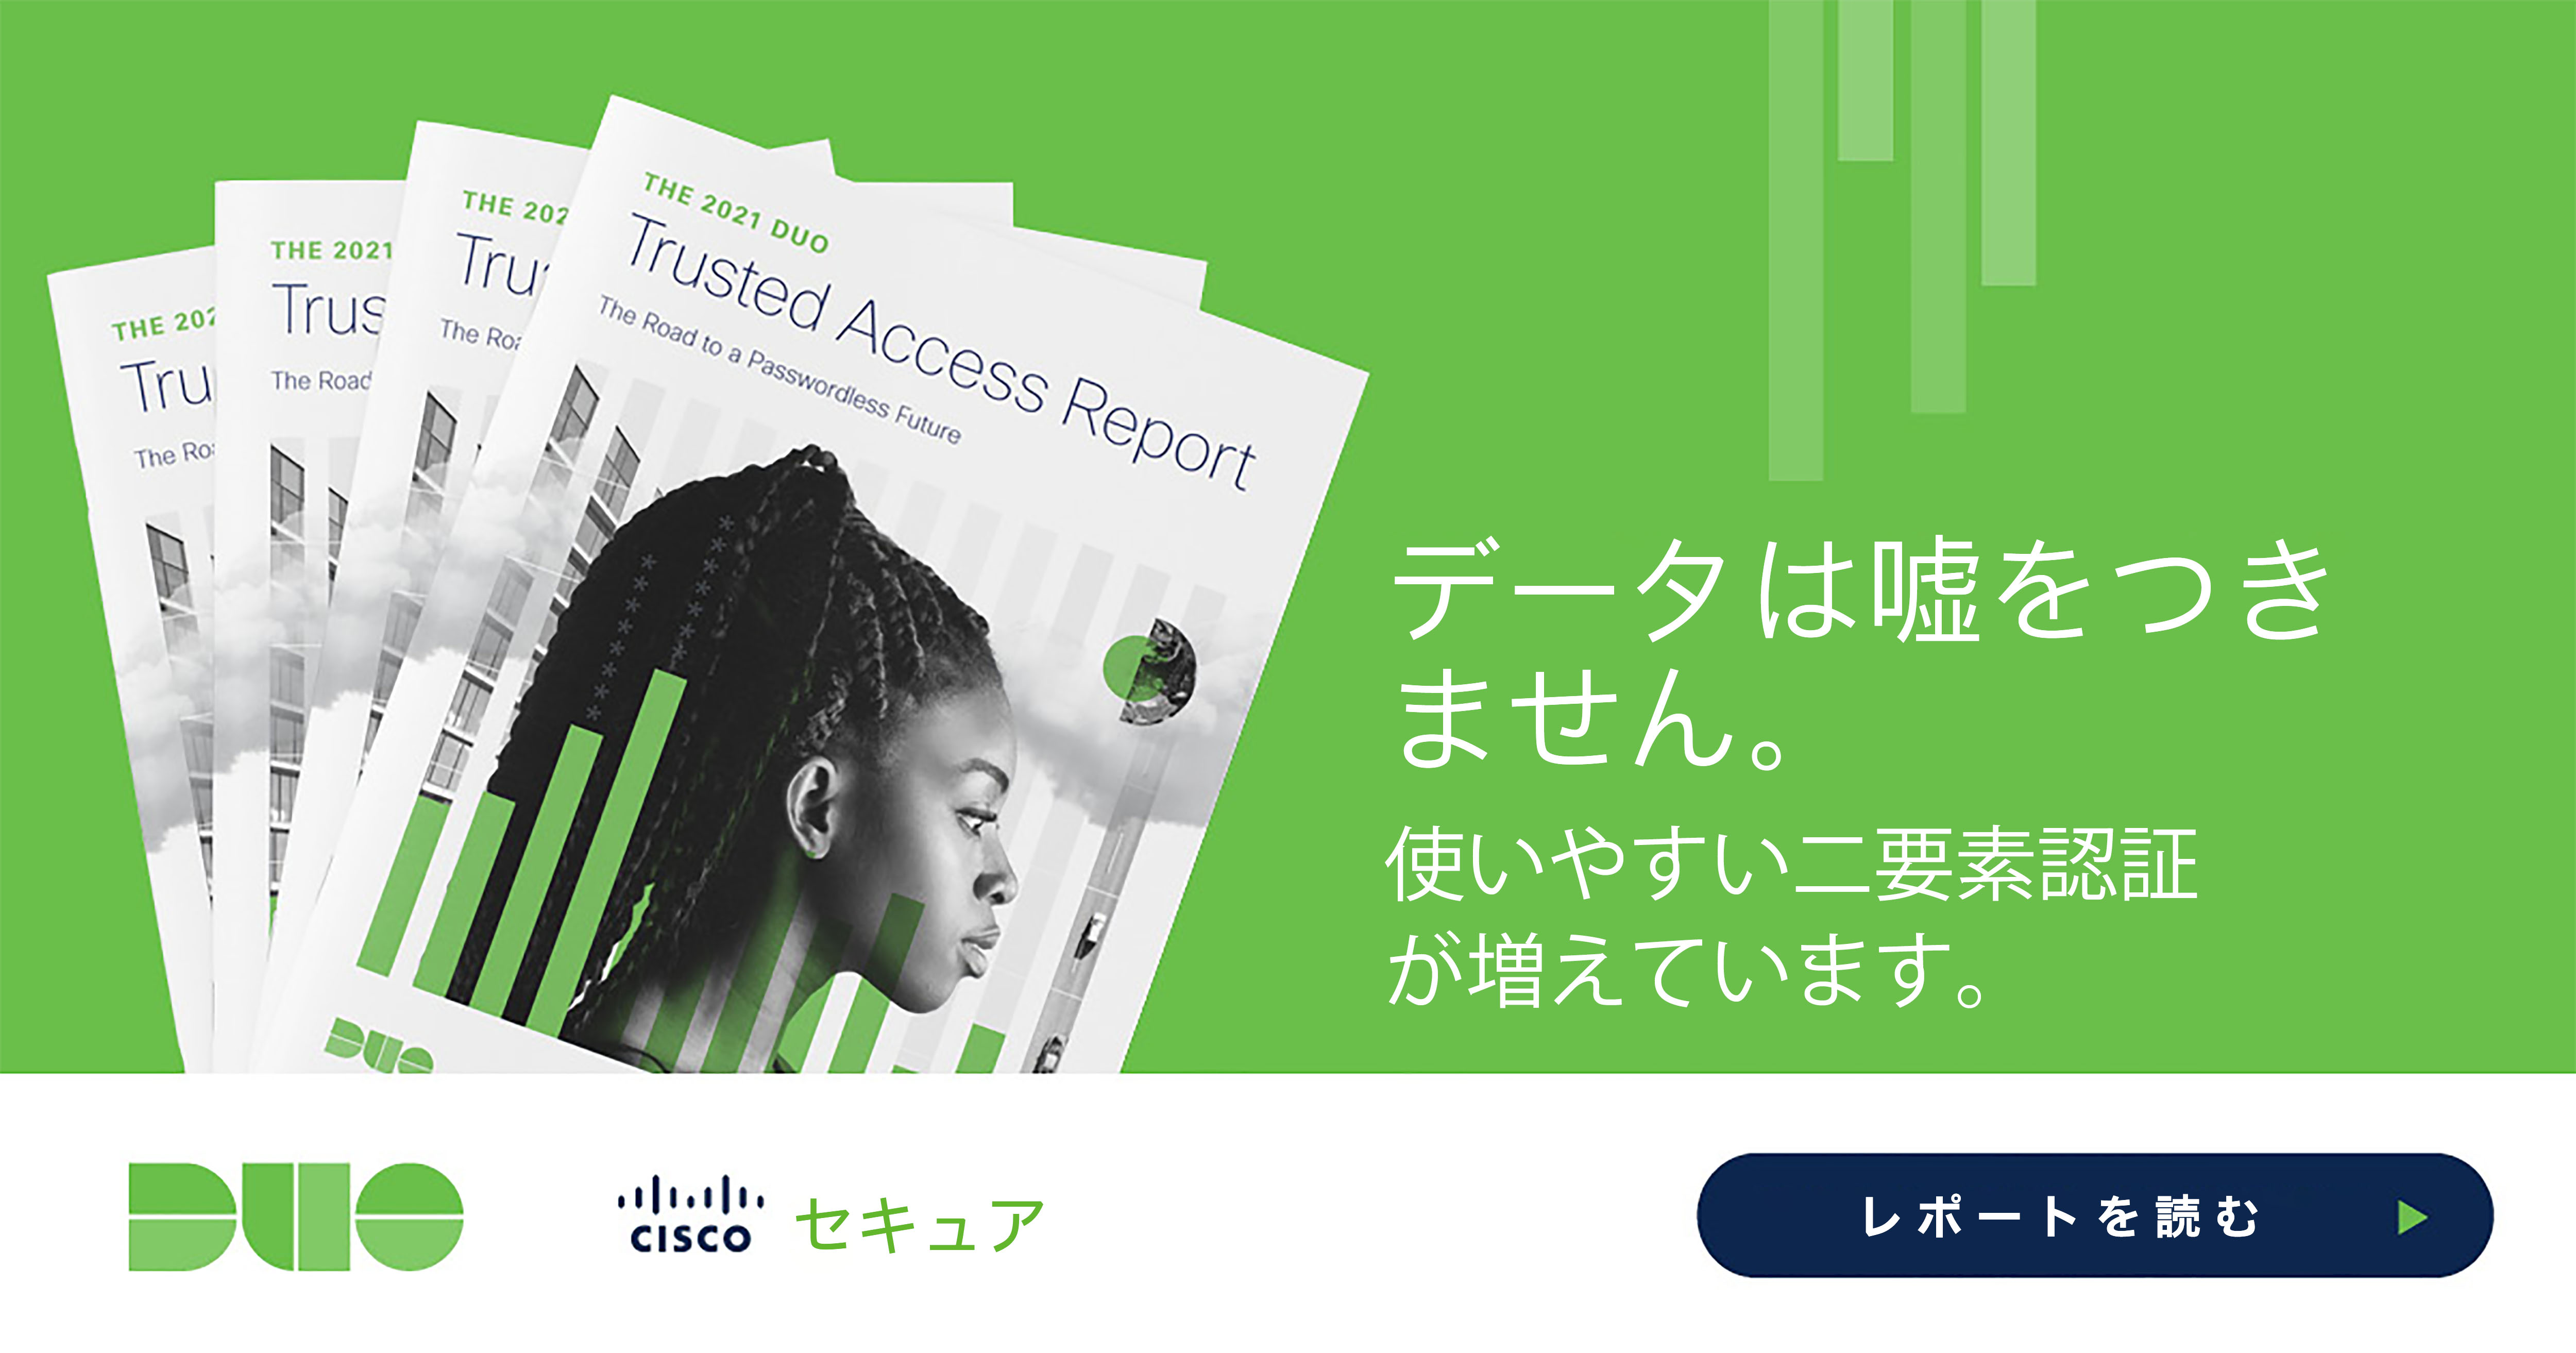 2021 Duo Trusted Access Report cover